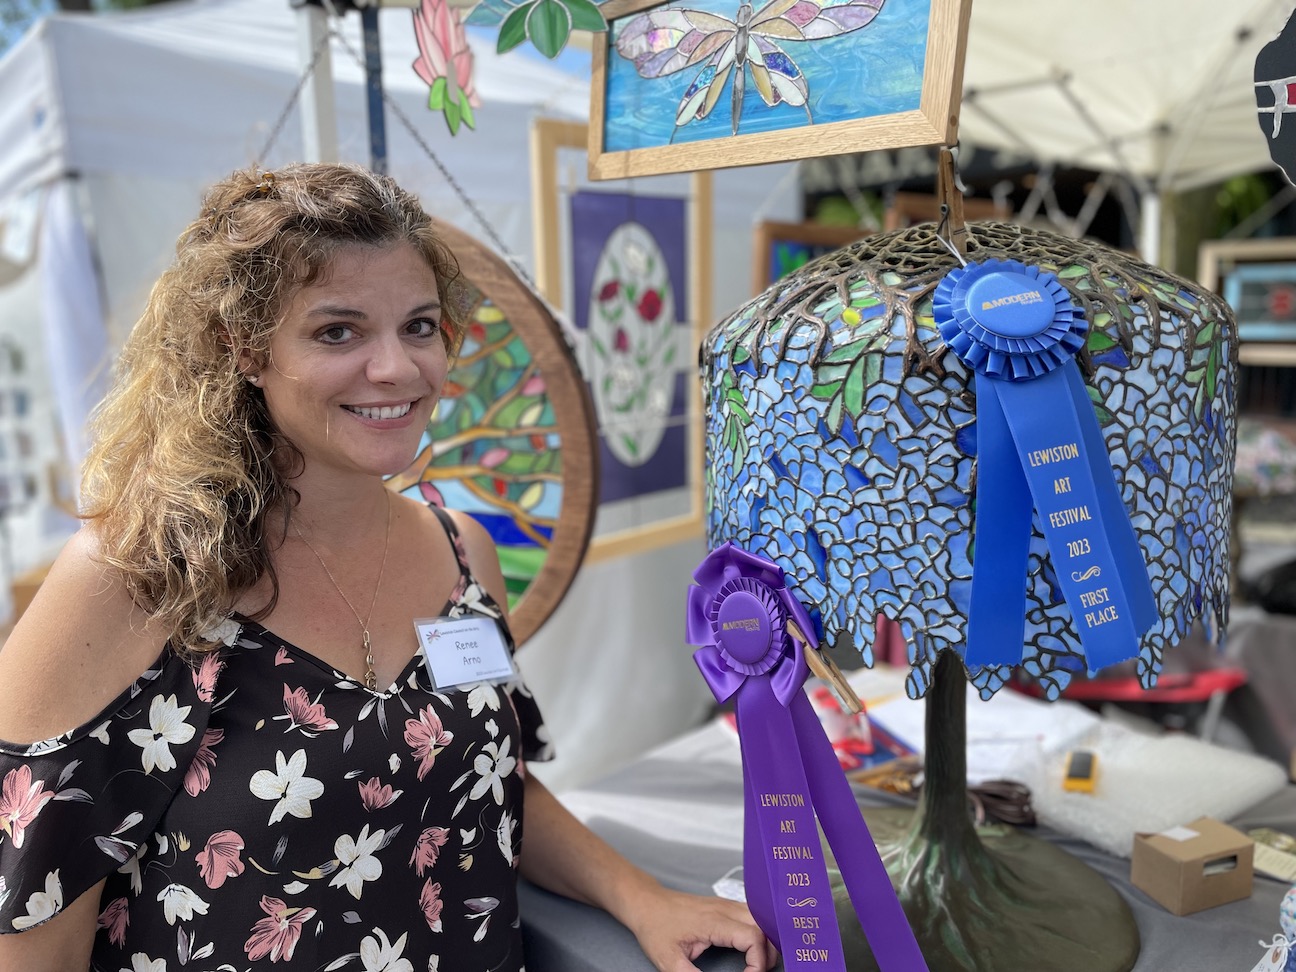 Glass artist Renee Arno won Best in Show at the 57th annual Lewiston Art Festival.